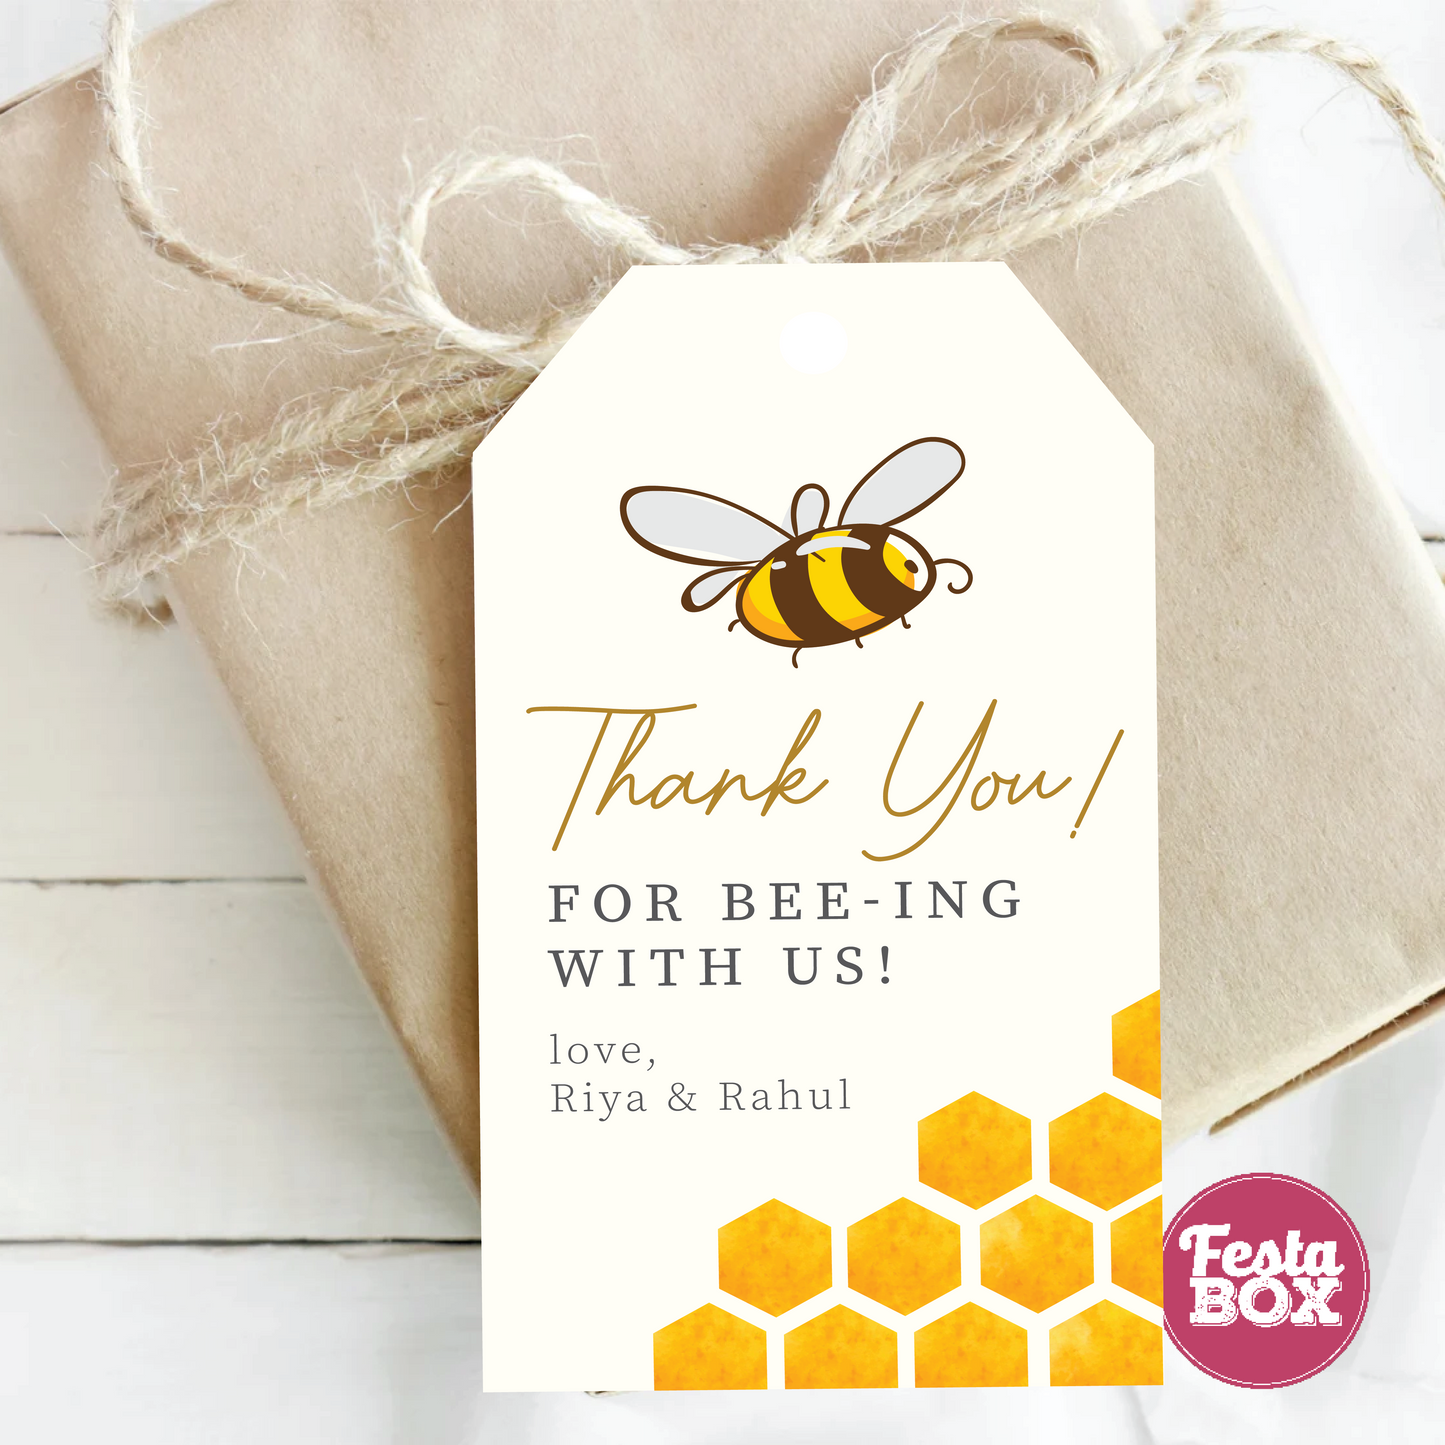 Gift Tags for Baby Shower - Honeybee Collection by Festabox - Option 3